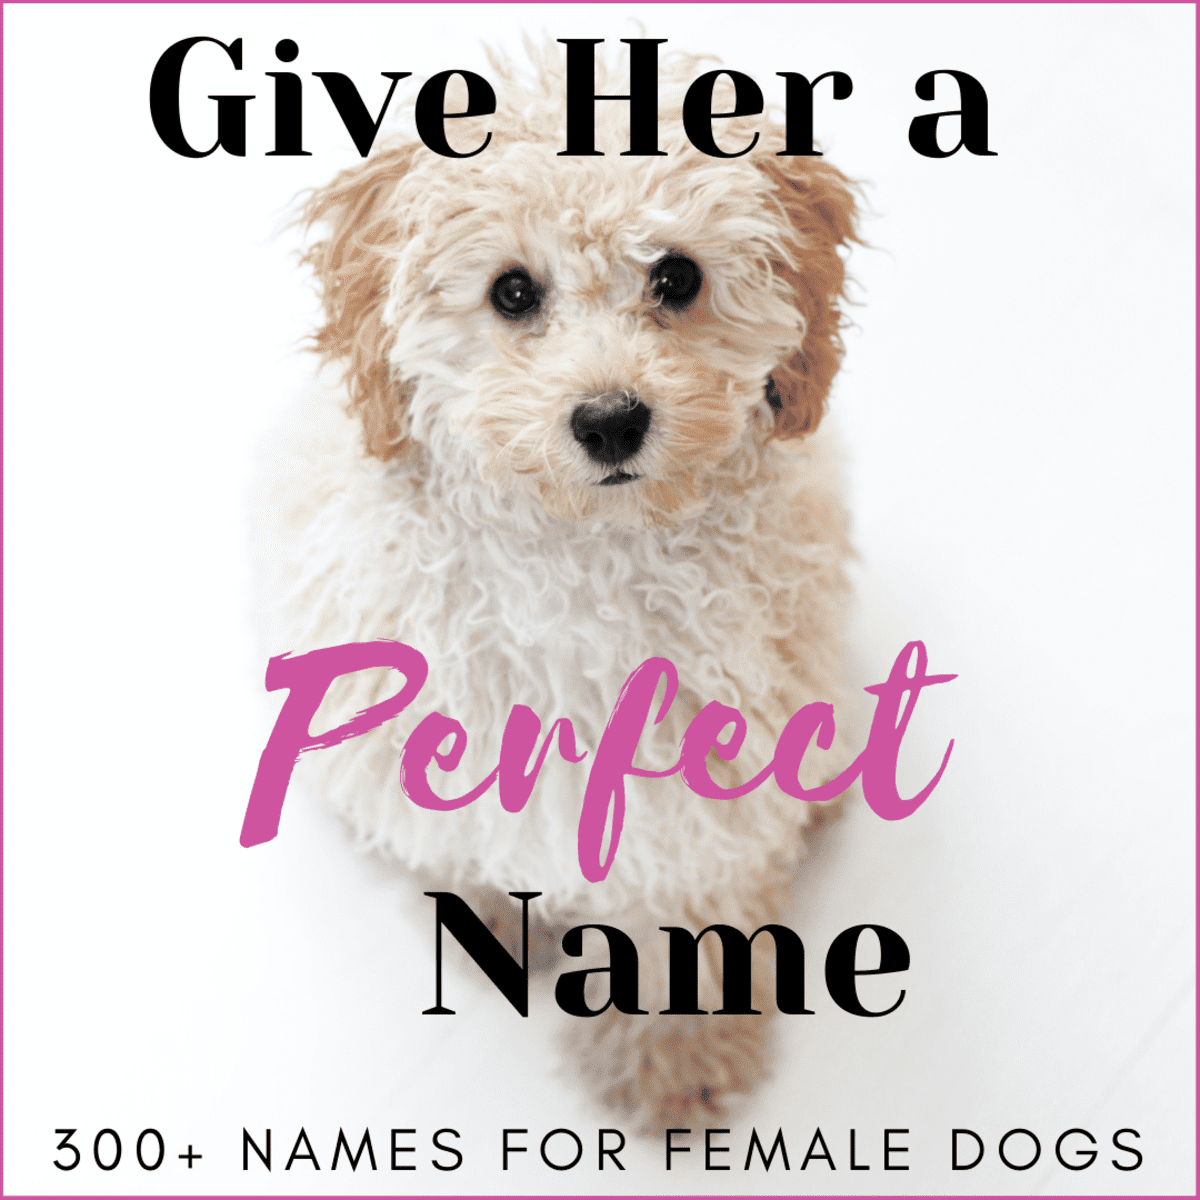 300+ Unique Female Dog Names by Category - PetHelpful